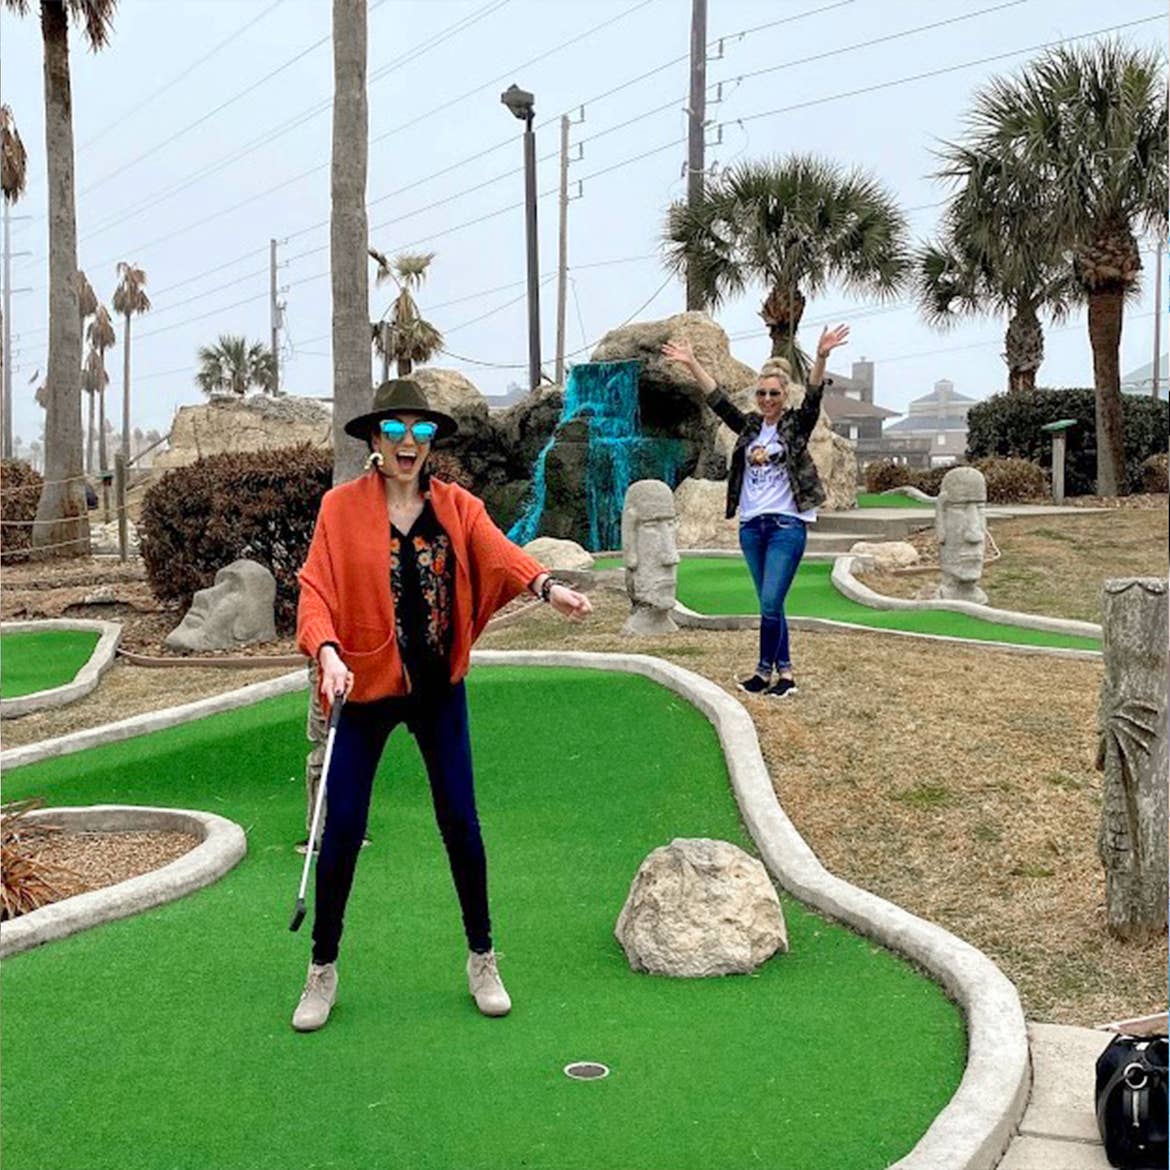 Featured Contributor, Amanda Nall (right) plays mini-golf with her friend at our Galveston Beach Resort in Galveston, Tx.